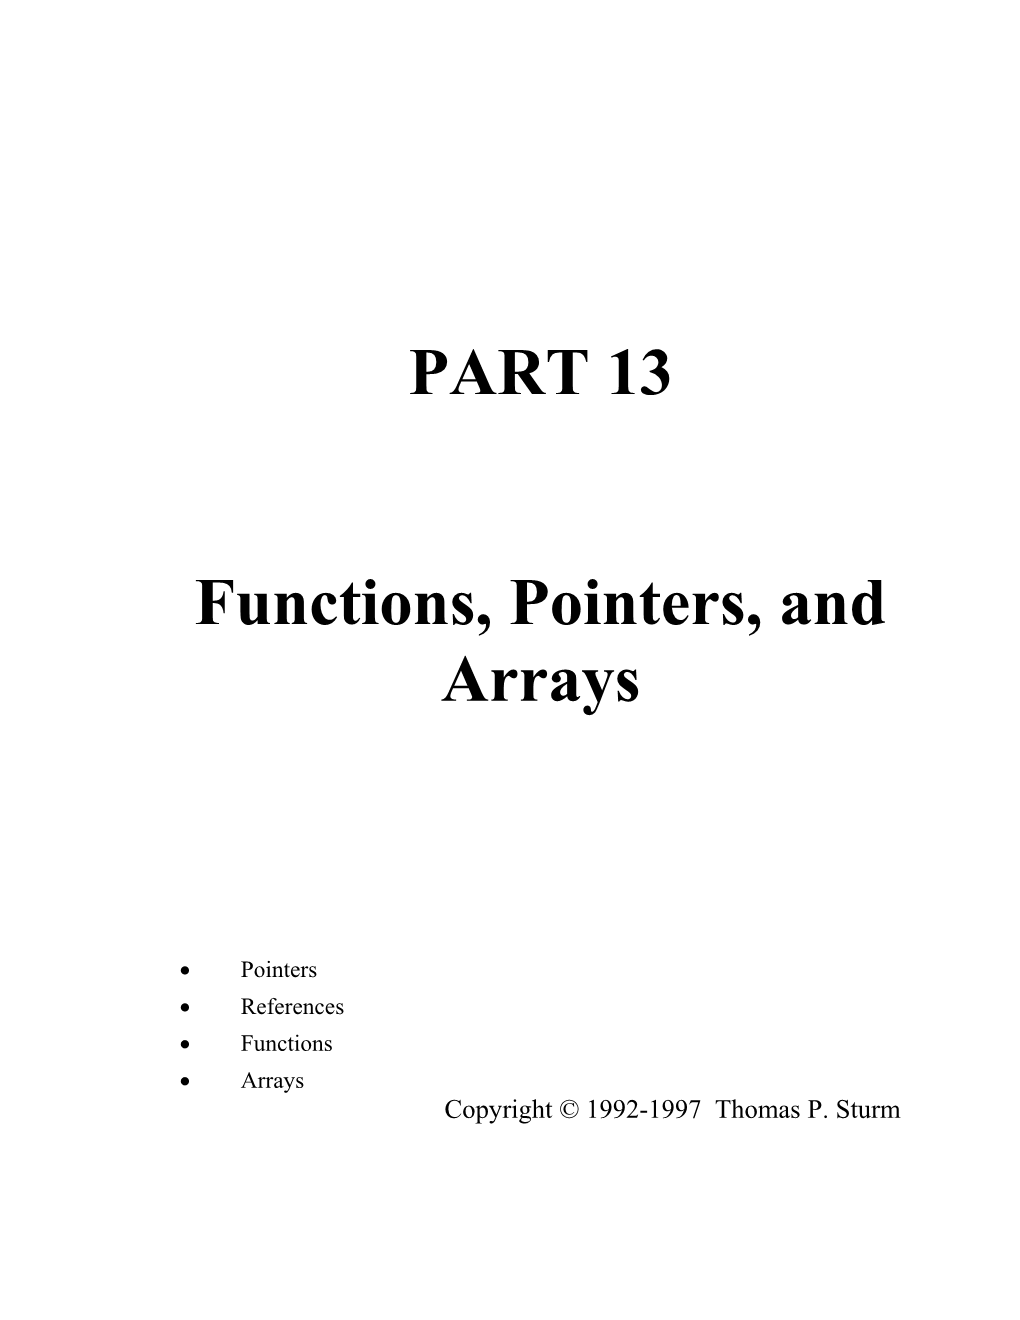 Chapter 13 - Functions, Pointers, and Arrays